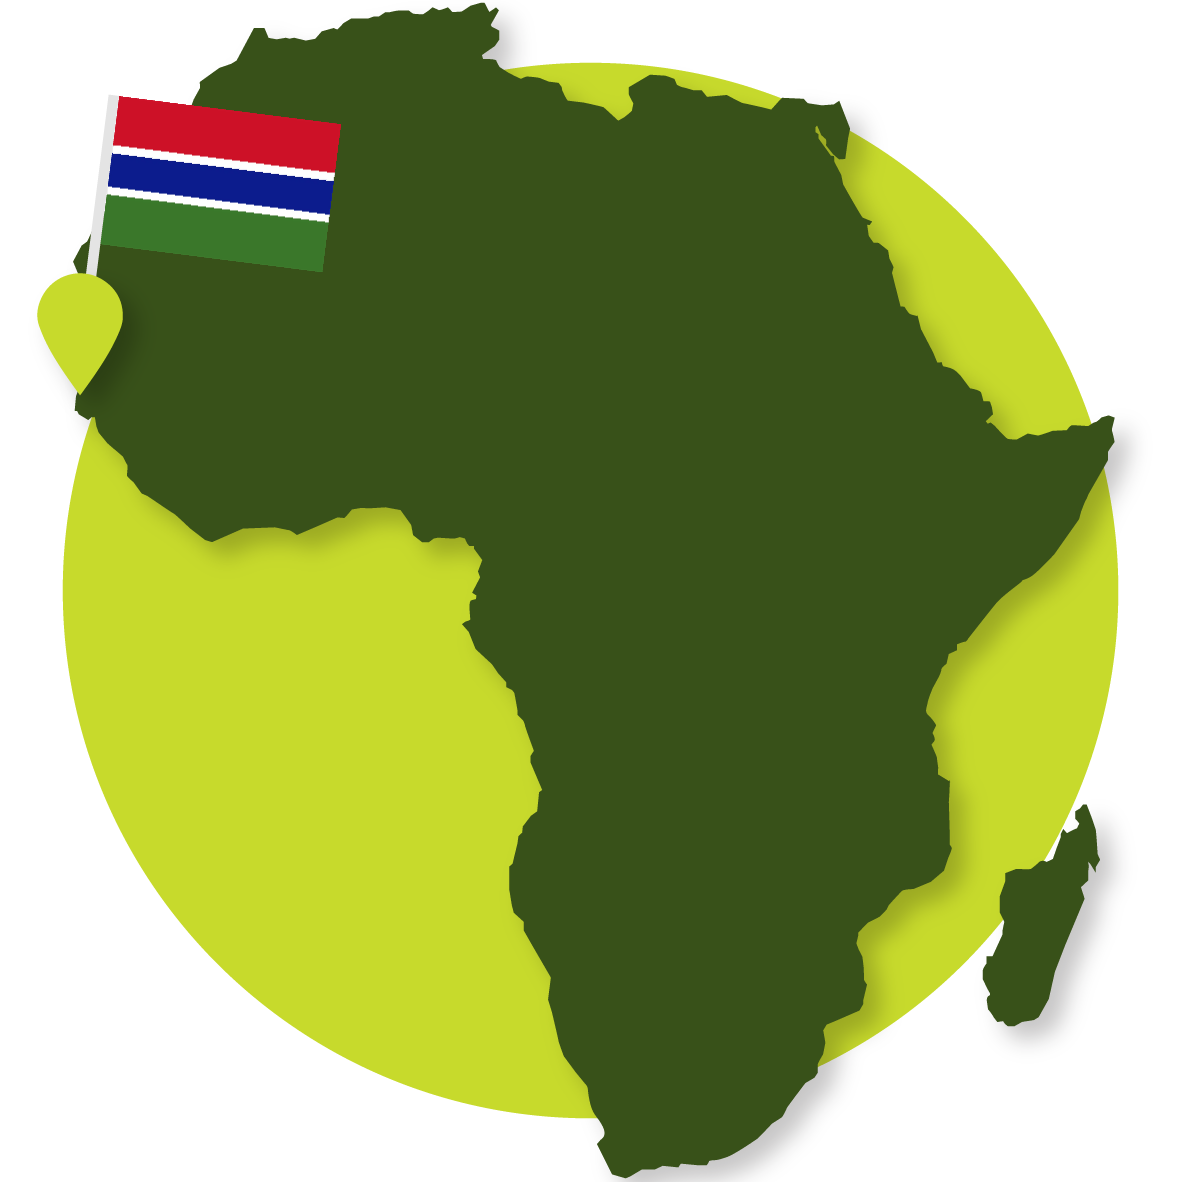 The Gambia Map